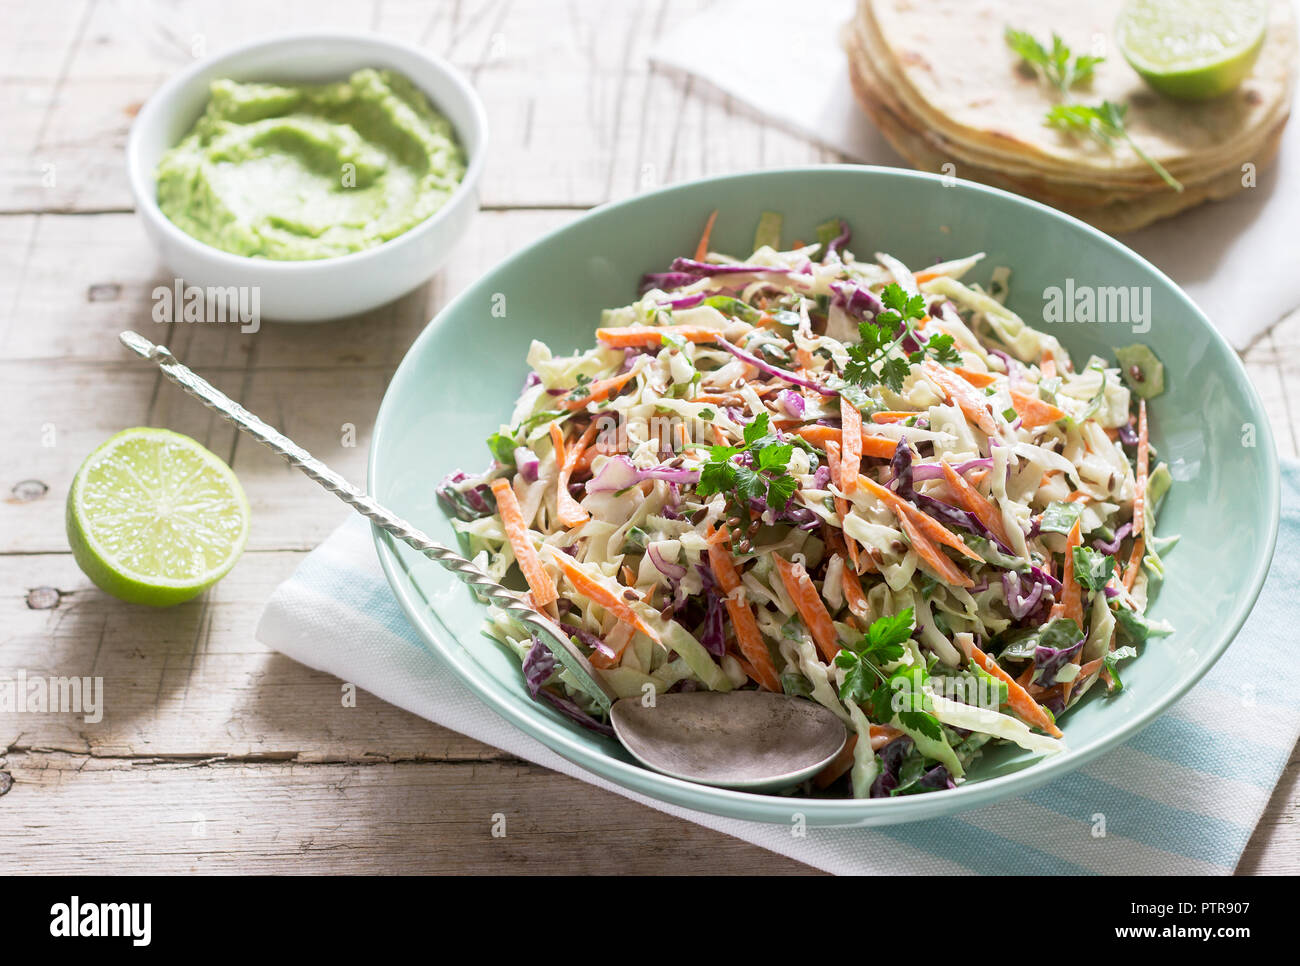 Coleslaw made from cabbage, carrots and various herbs, served with tortillas and guacamala on a wooden background. Selective focus. Stock Photo